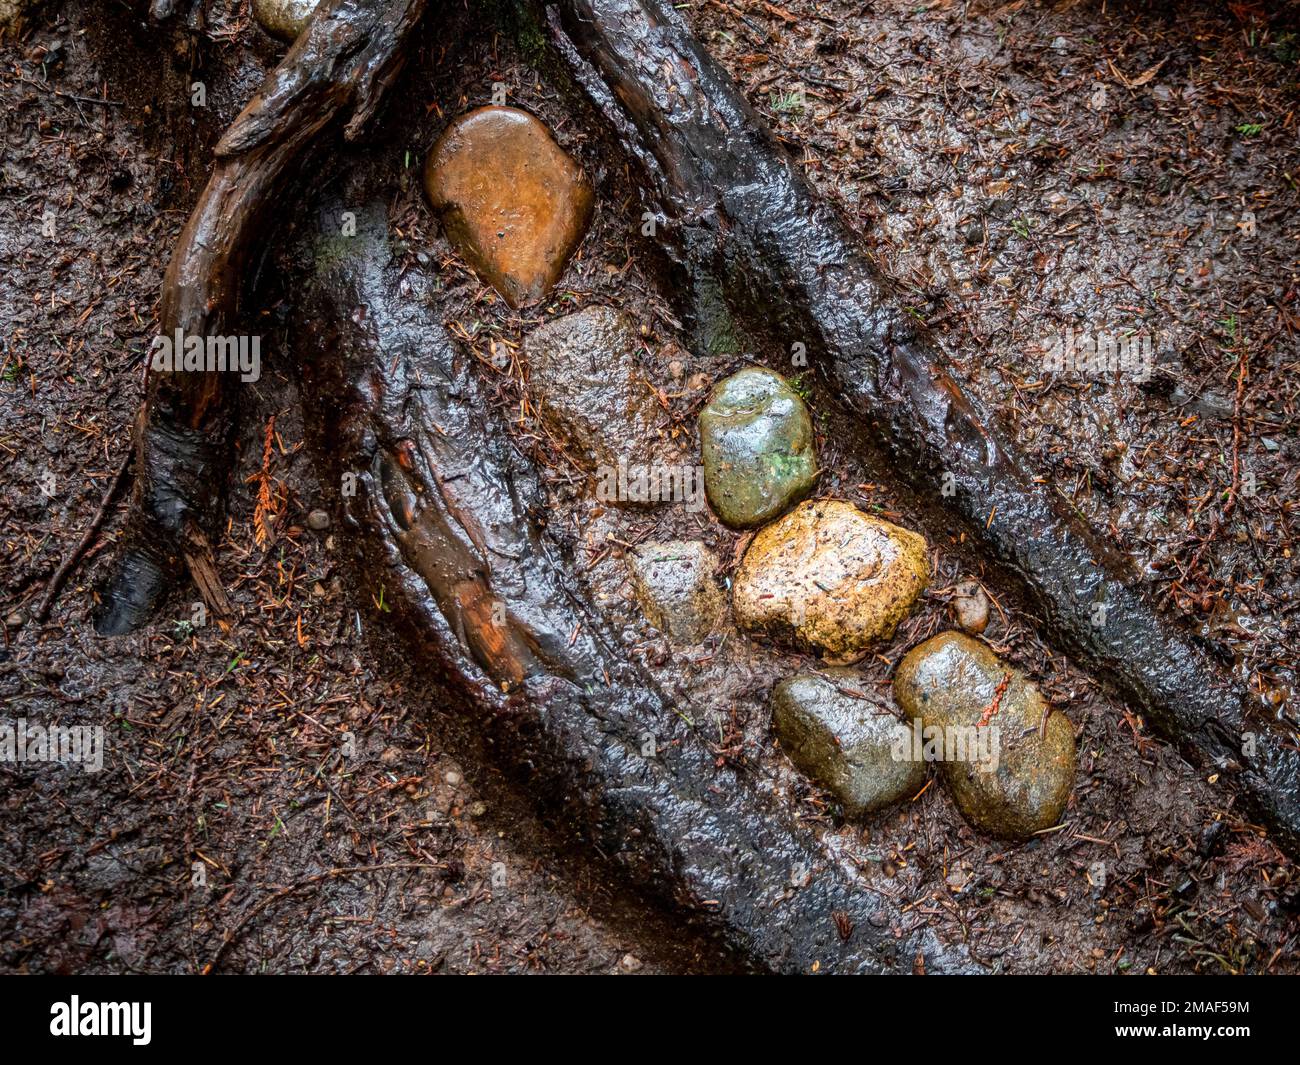 WA22954-00...WASHINGTON - Colorful rocks sandwiched between roots along the Mainline trail at Pleasure Valley Conservation Area. Stock Photo